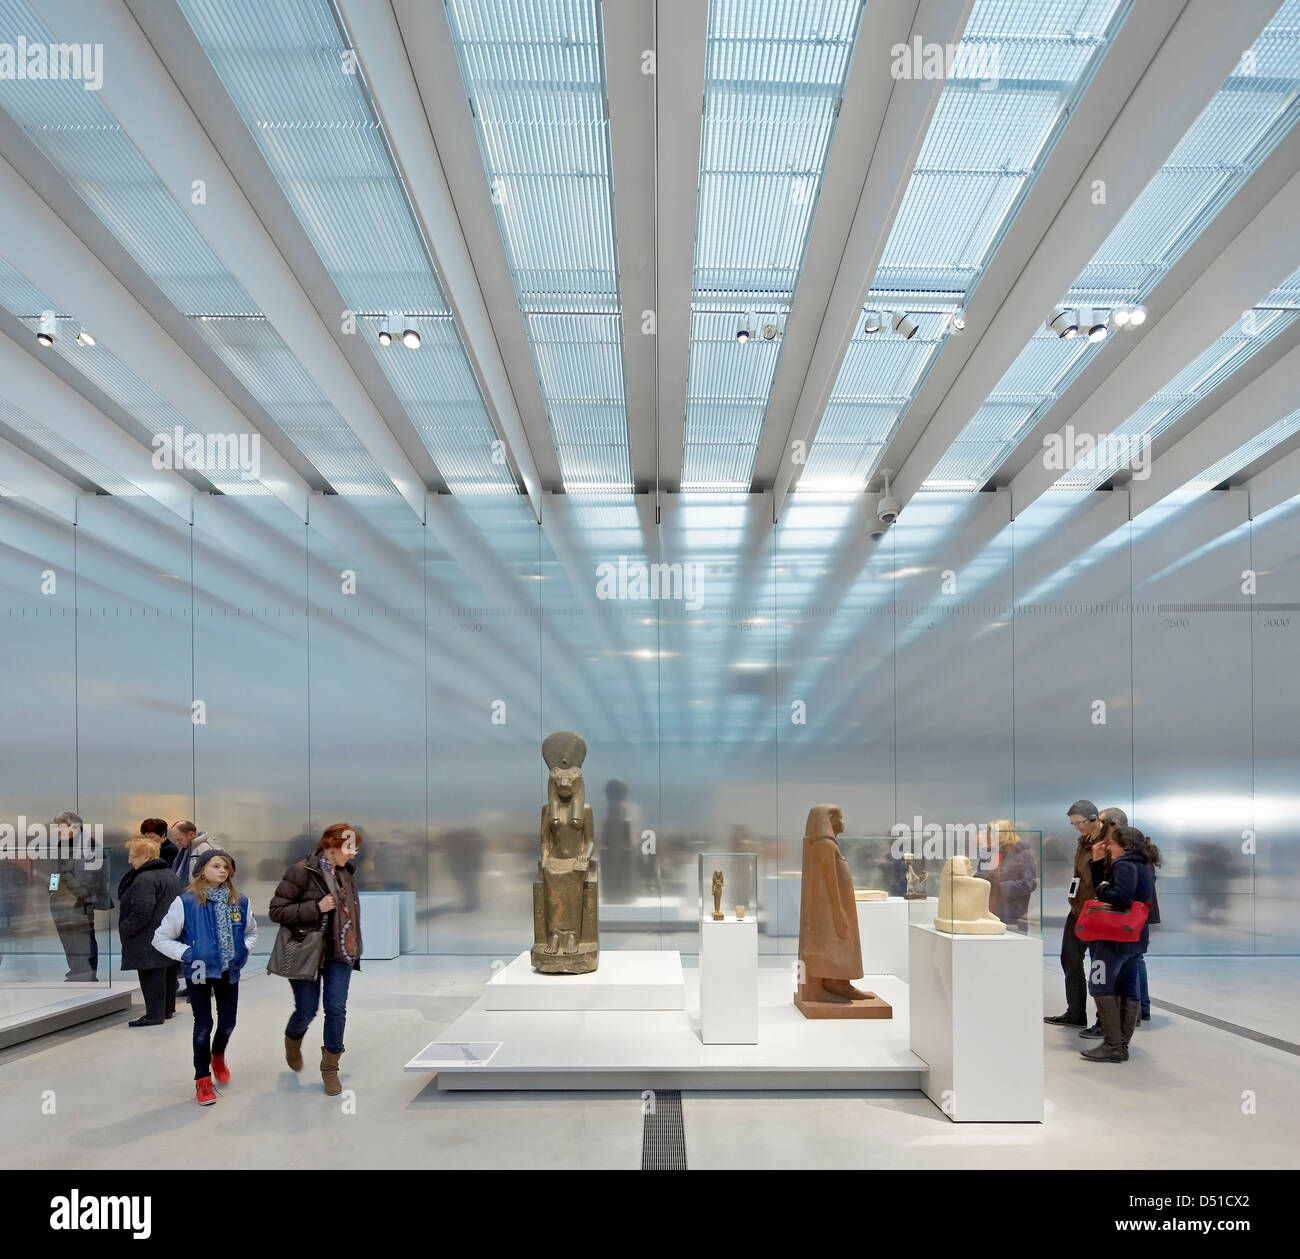 Musée Du Louvre Lens, Lens, France. Architect: SANAA, 2012. The permanent  collection hall with glazed roof panels, reflective w Stock Photo - Alamy